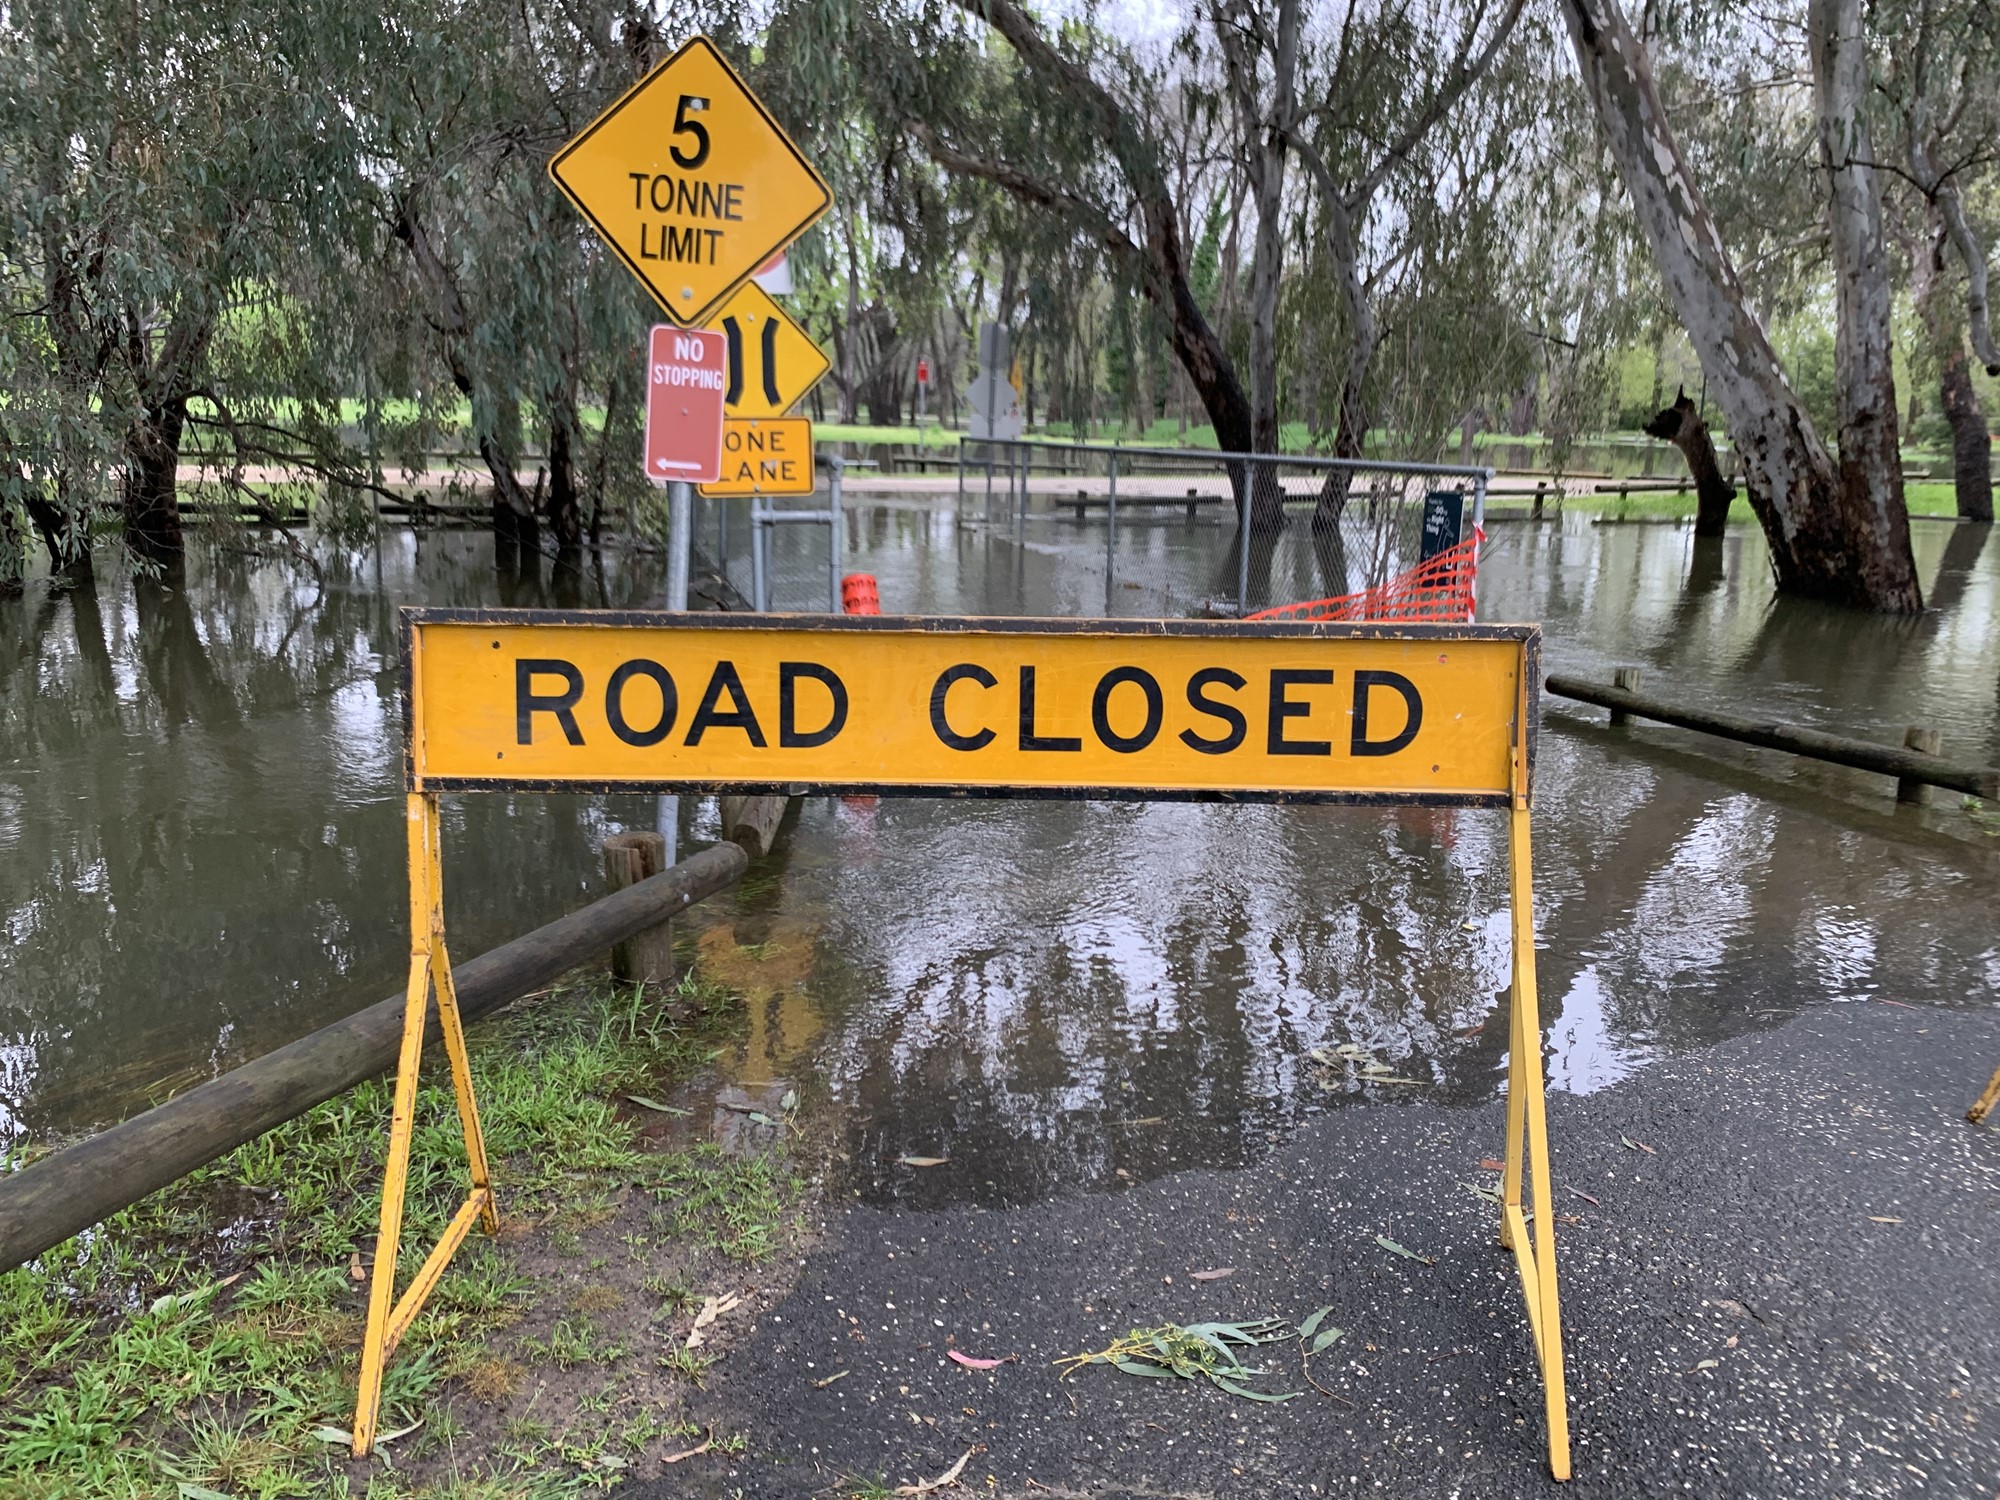 A road closed sign in front of floodwater